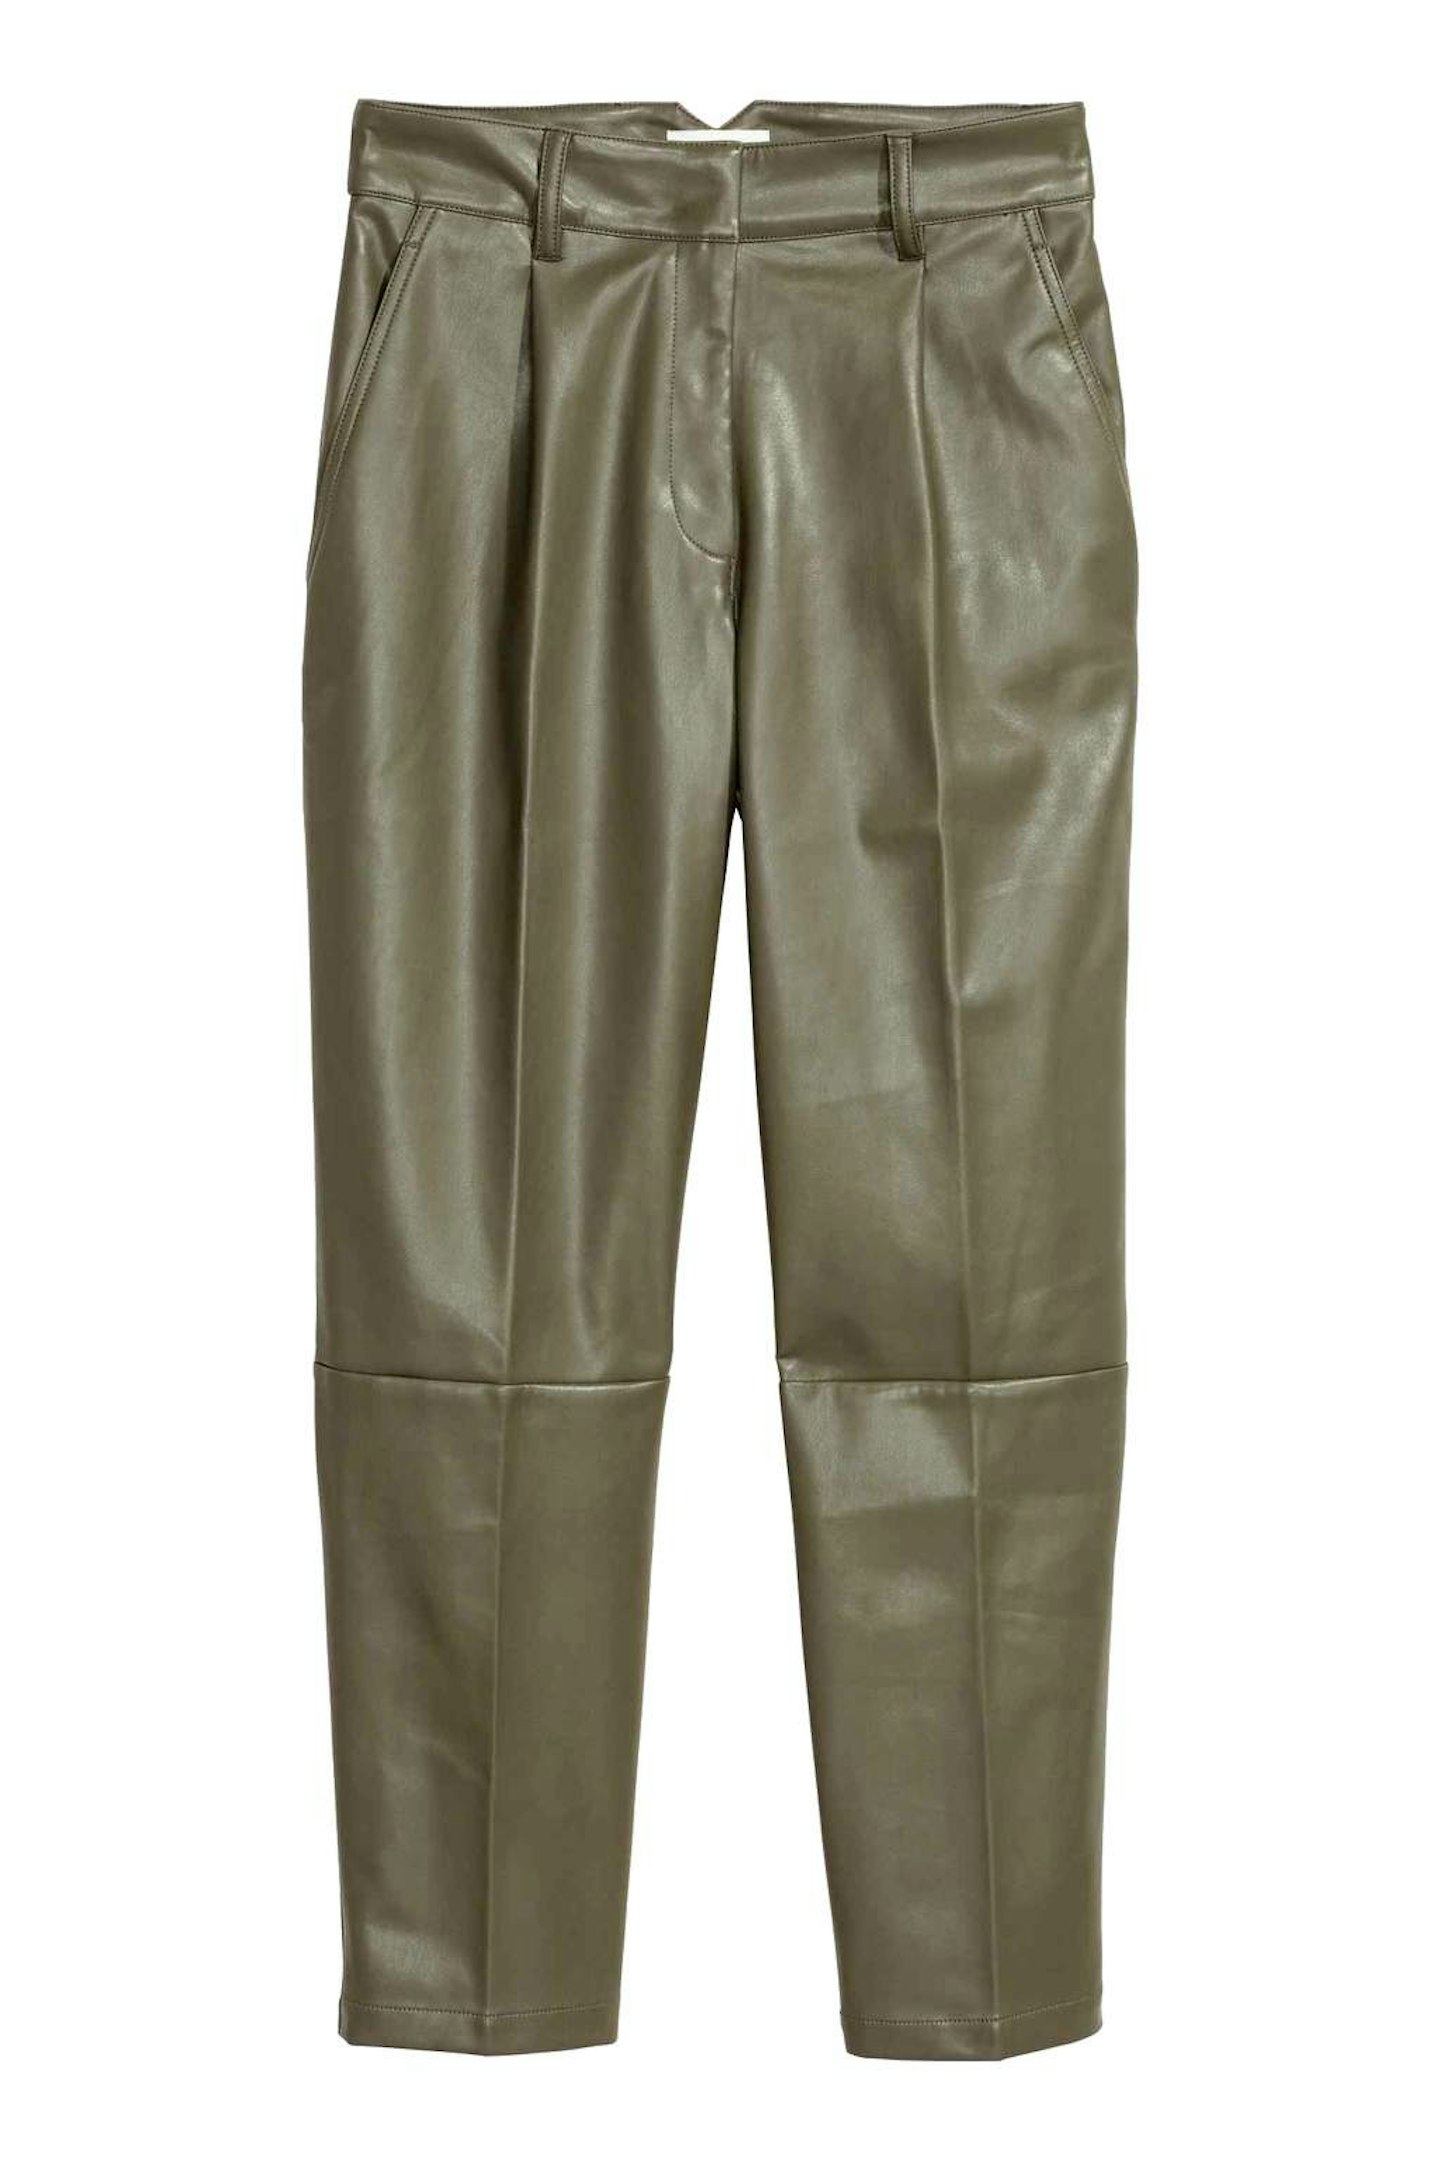 hm-trousers-faux-leather